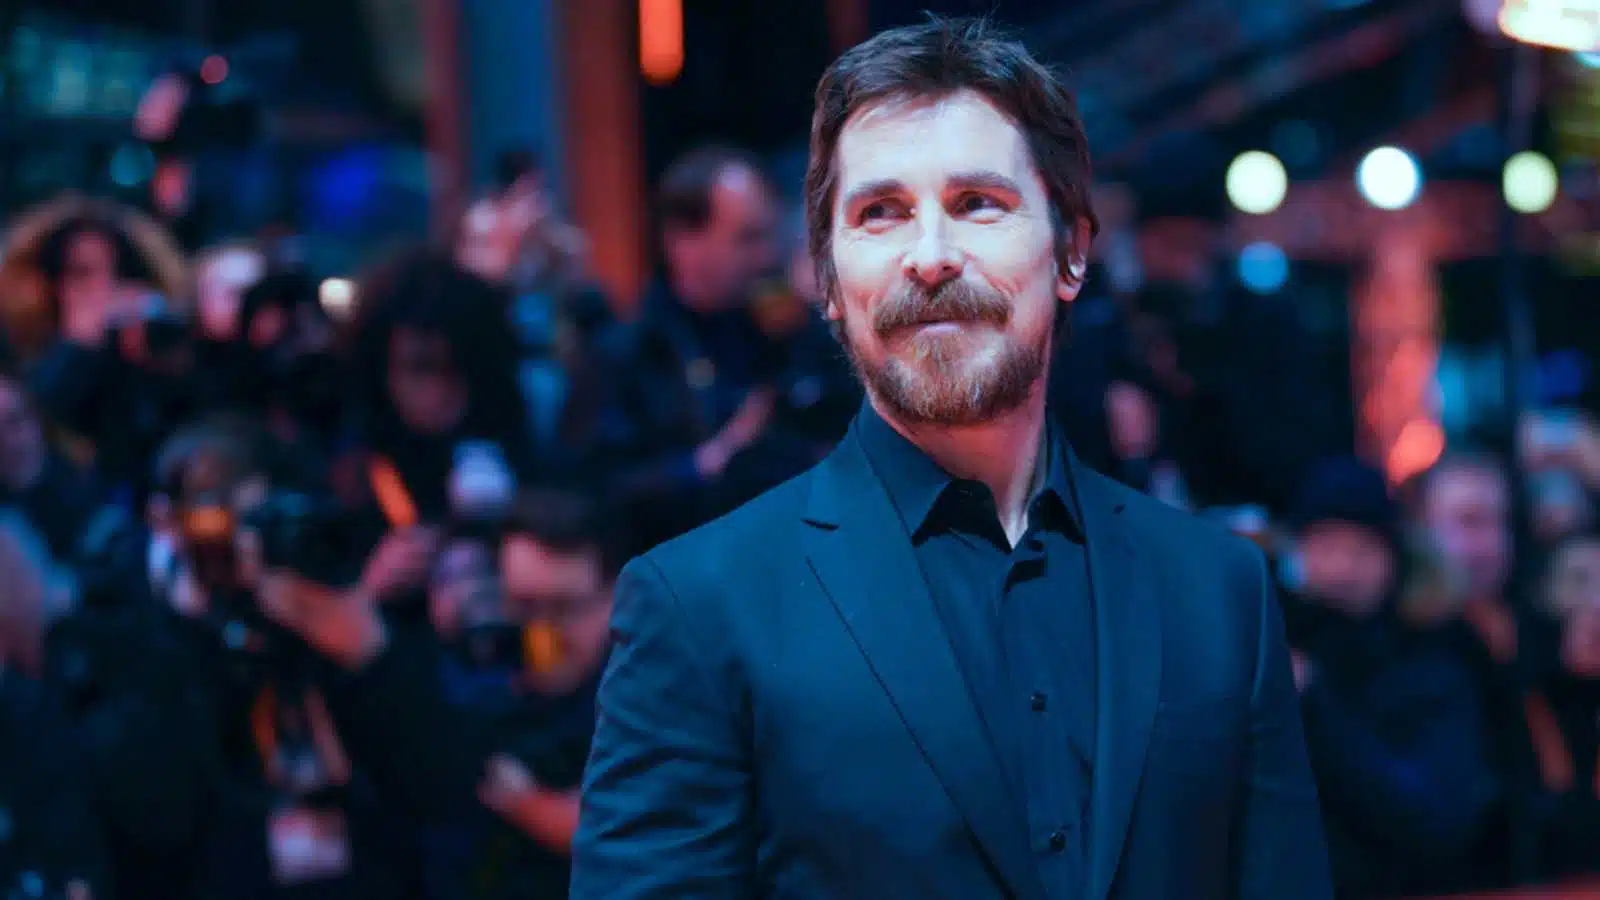 Christian Bale poses at the 'Vice' (Vice - Der zweite Mann) premiere during the 69th Berlinale International Film Festival Berlin at Berlinale Palace on February 11, 2019 in Berlin, Germany.